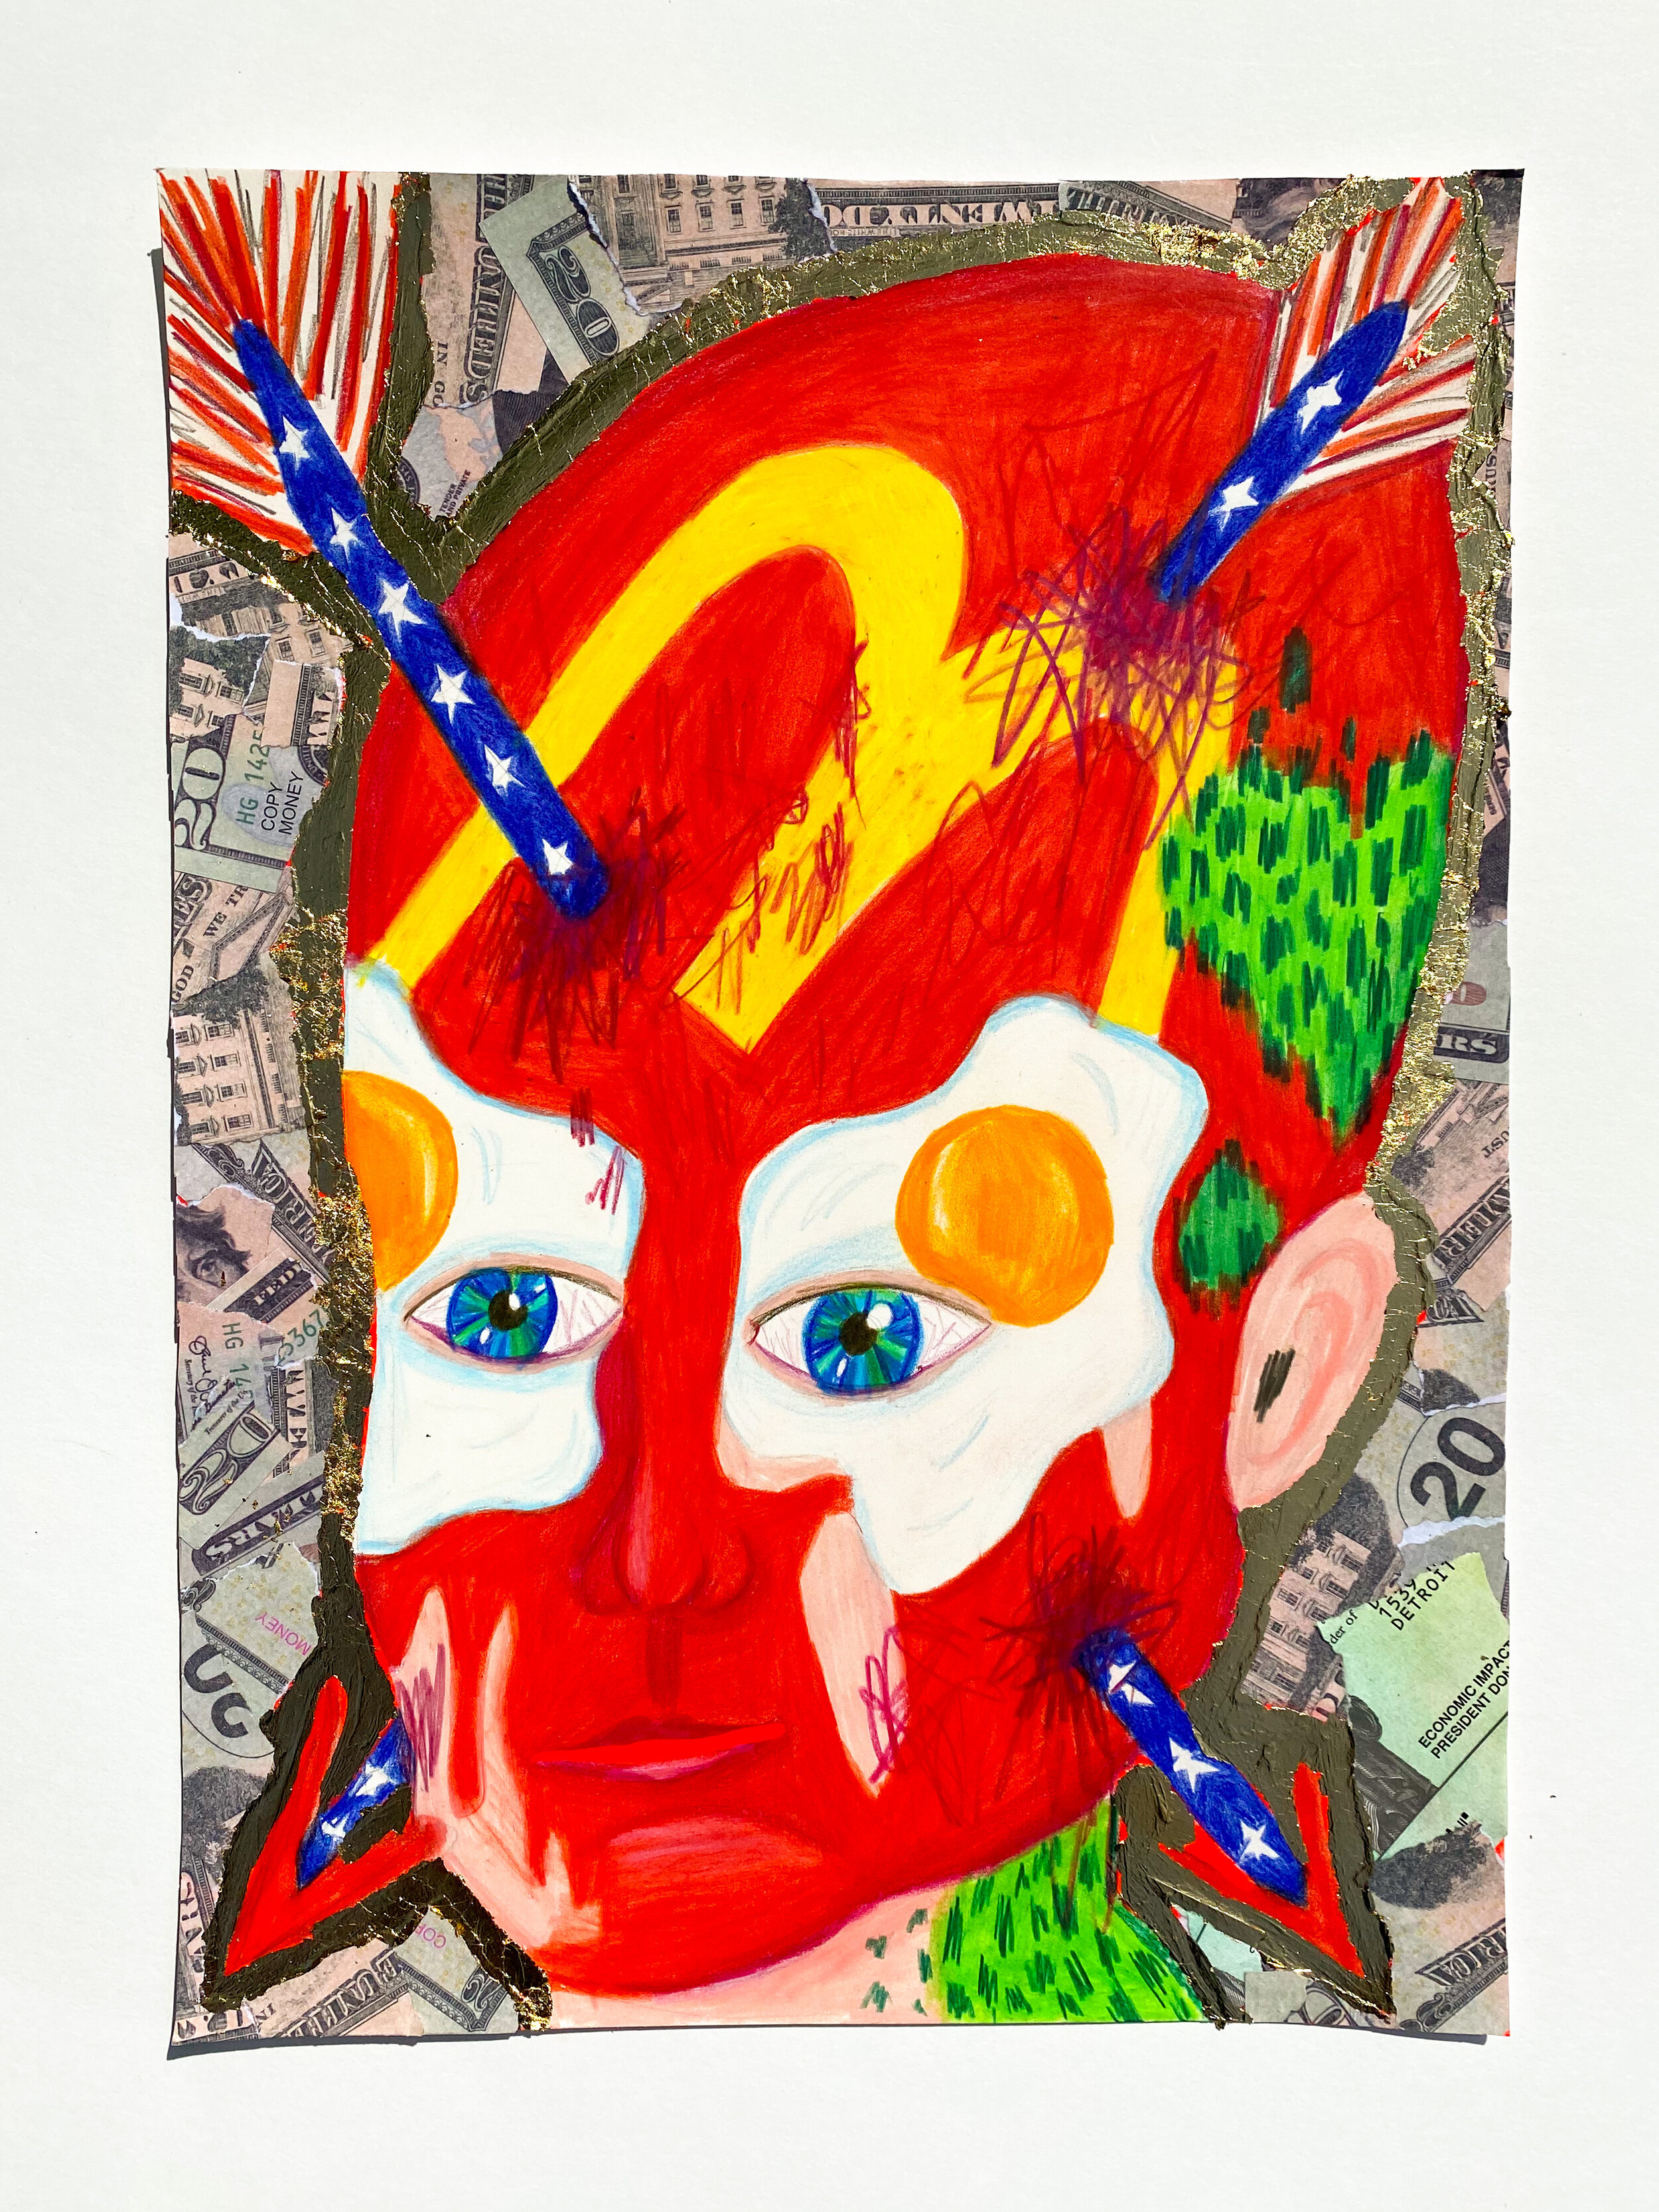  Baby with McDonald’s Face Paint and Fried Egg Eyes, 2020  14 x 10 inches (35.56 x 25.4 cm.)  Colored pencil, Modge Podge, fake money, stimulus check, acrylic paint, and gold leaf on paper  Private Collection, Detroit 